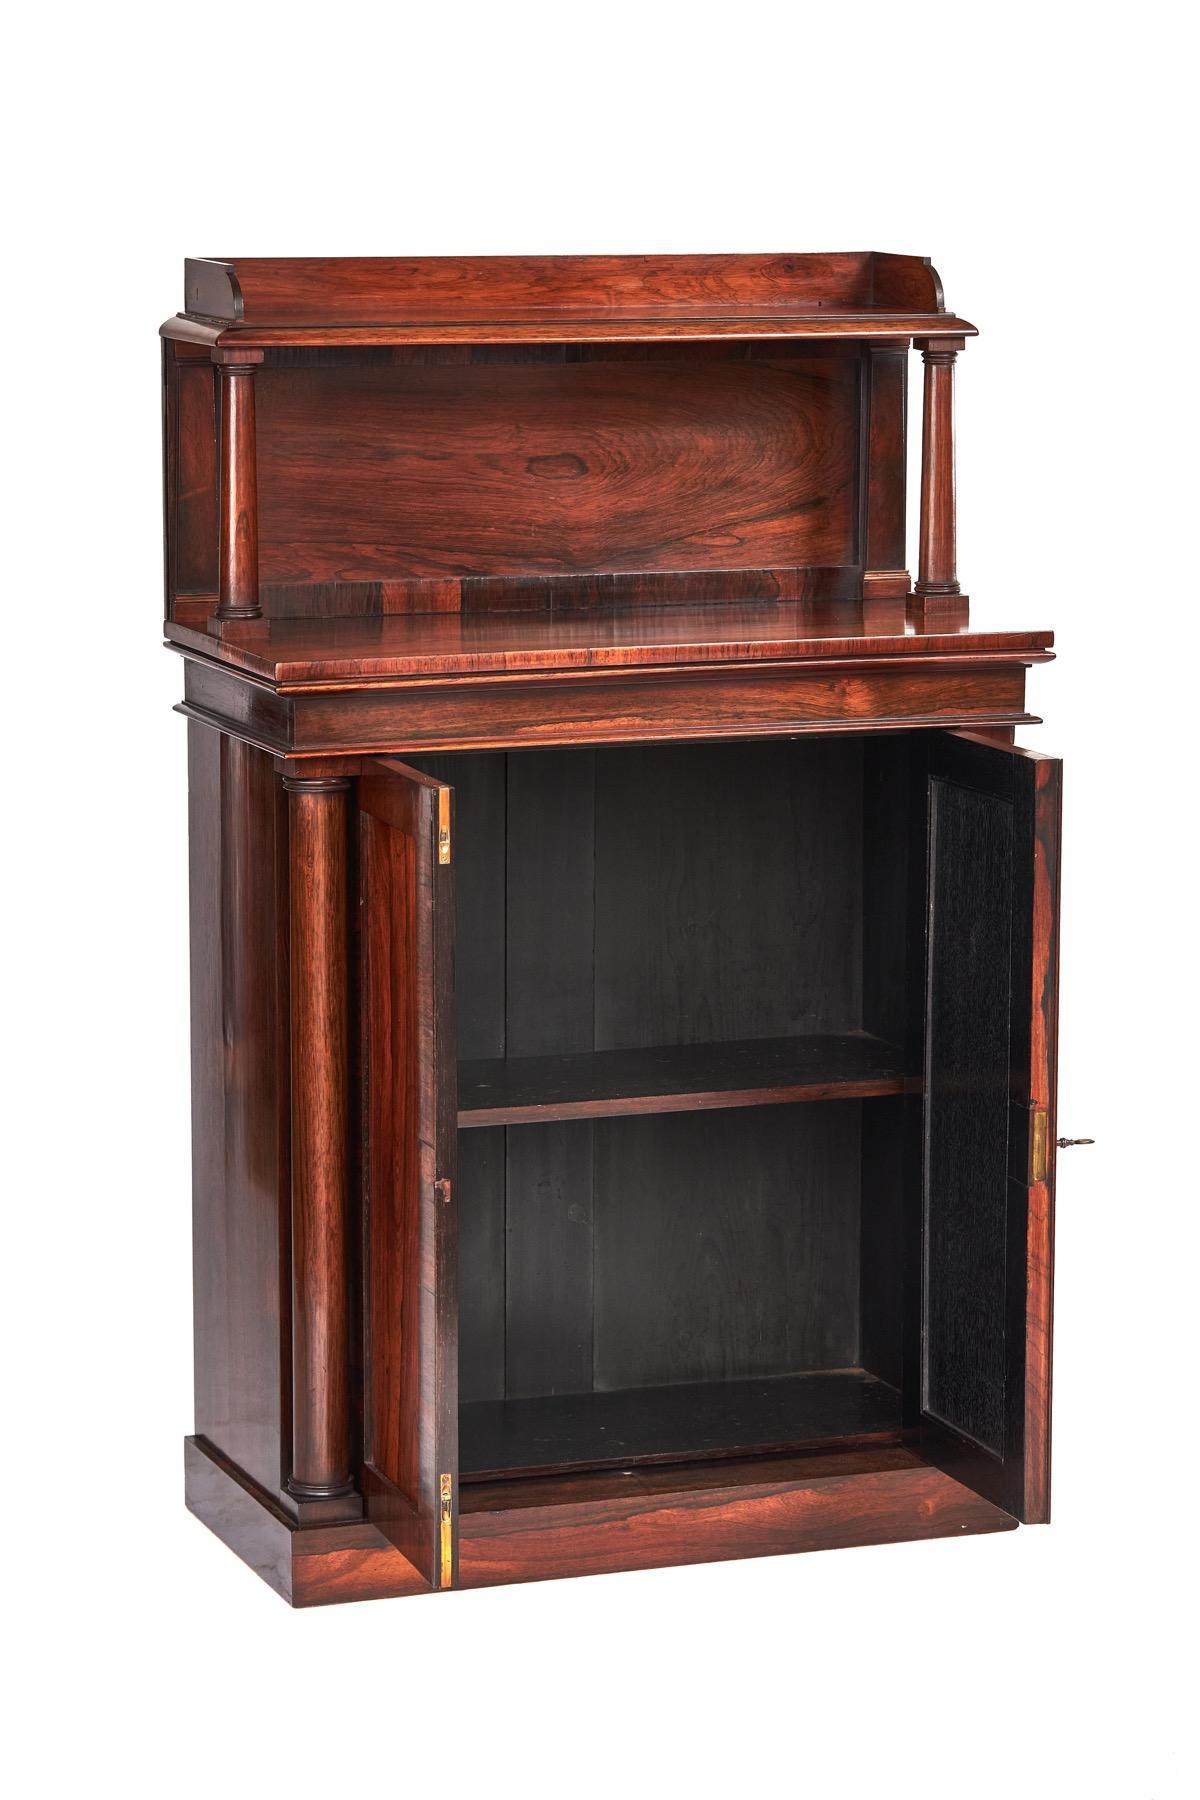 W1V Period Rosewood Chiffonier, 
Top with inset panel back, 
Pair Turned Tapering Columns Supporting,
Three Quarter gallery top, 
Frieze with moulding top & bottom, 
Two Door Base with inset Panels. working lock & key, open to reveal:
Single